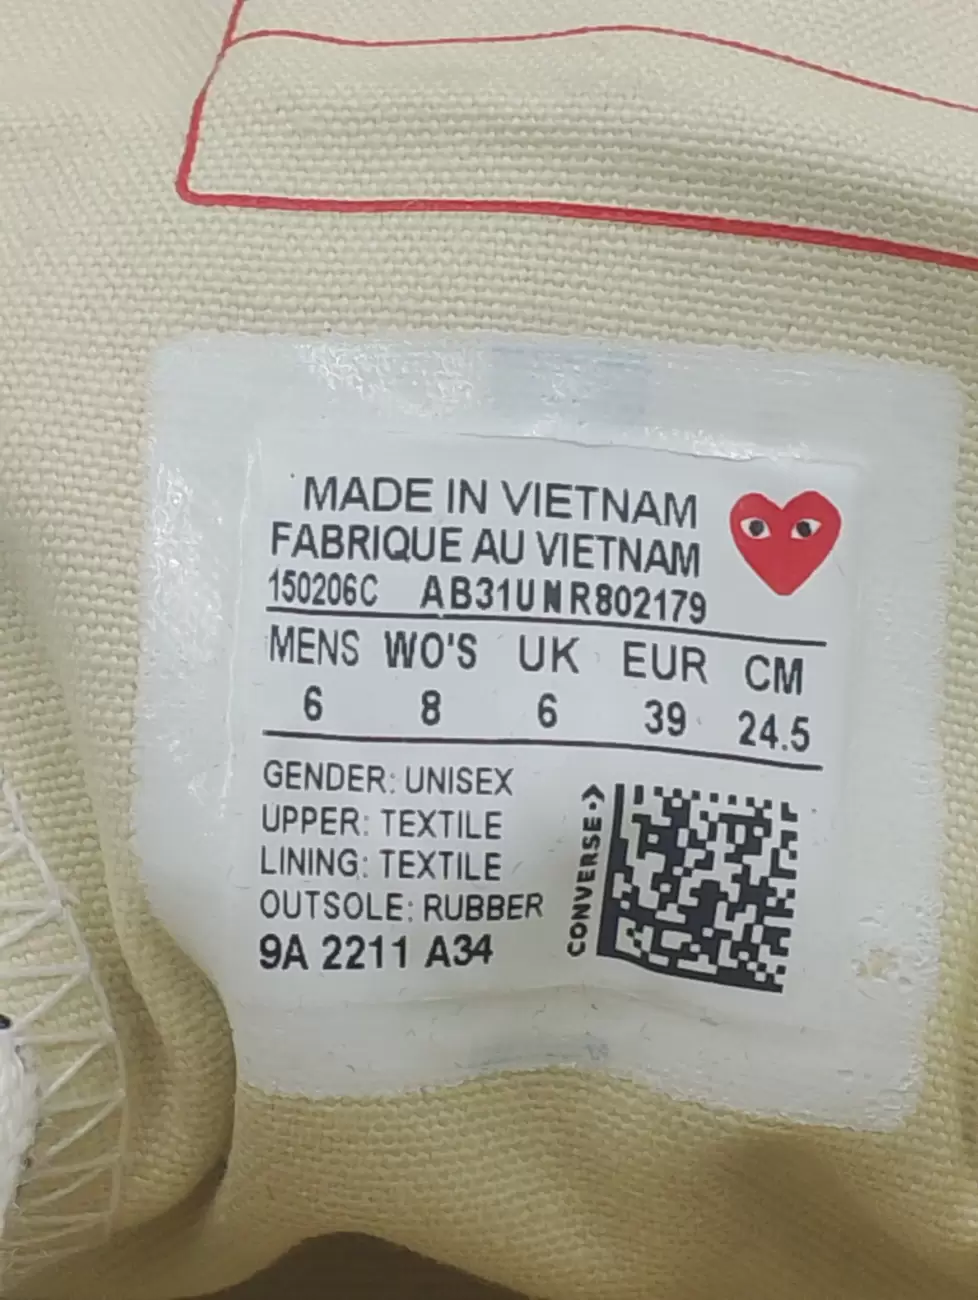 Made in Vietnam Tag